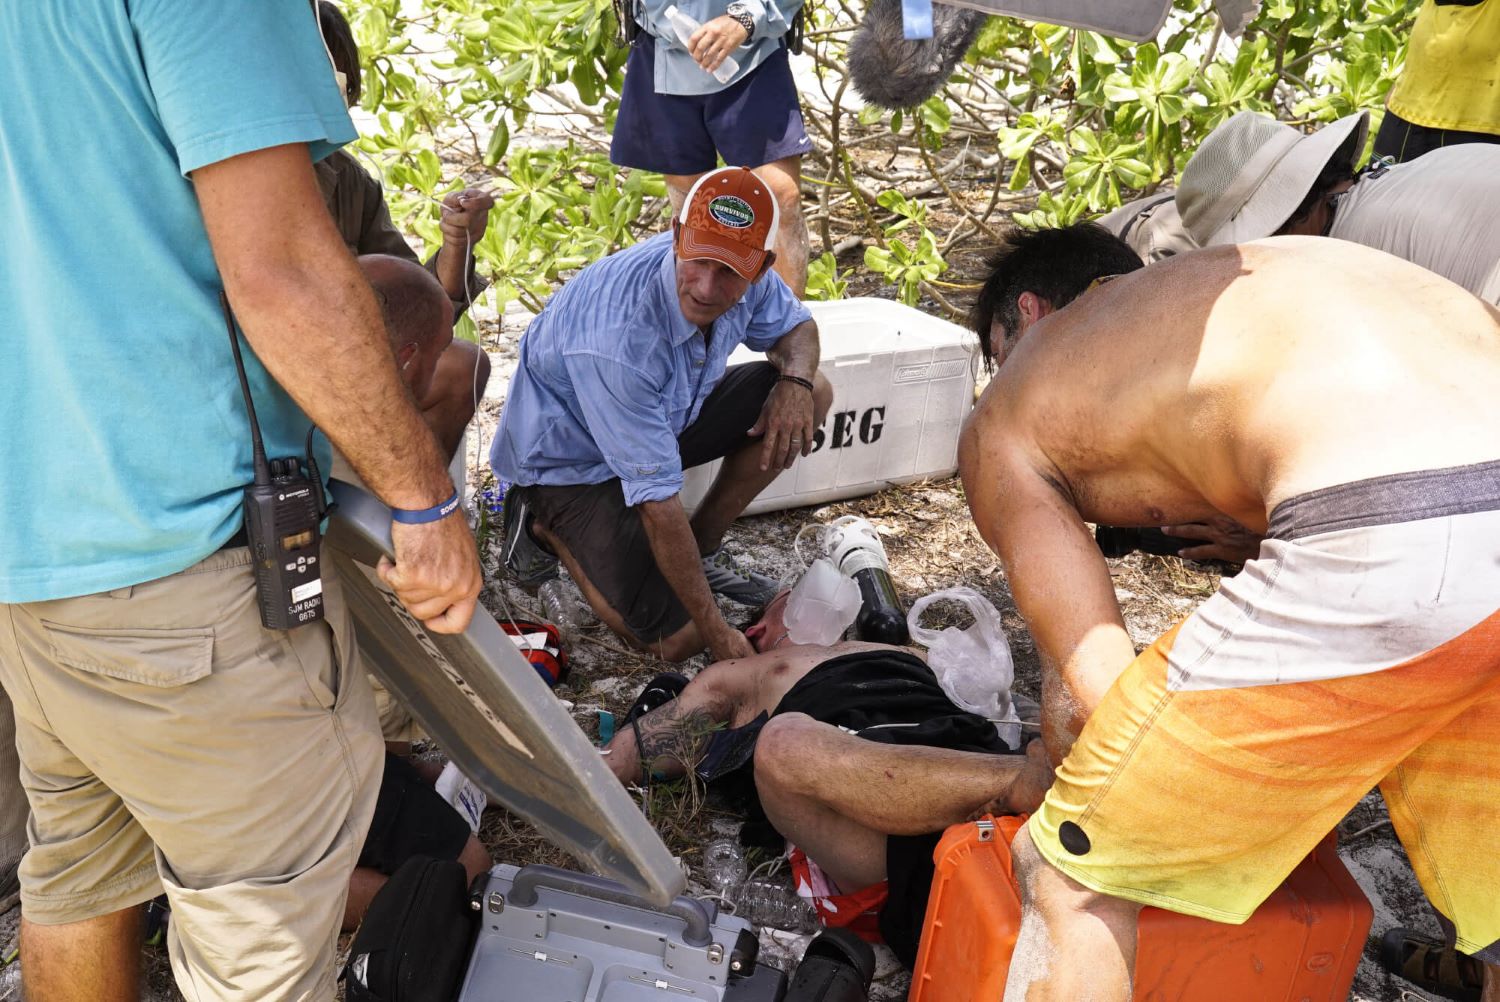 Jeff Probst, the Medical Team, and Nick Maiorano assess the condition of Caleb Reynolds on the beach during 'Survivor' Season 32 Episode 4, which ultimately ended in Caleb's medical evacuation from the show.